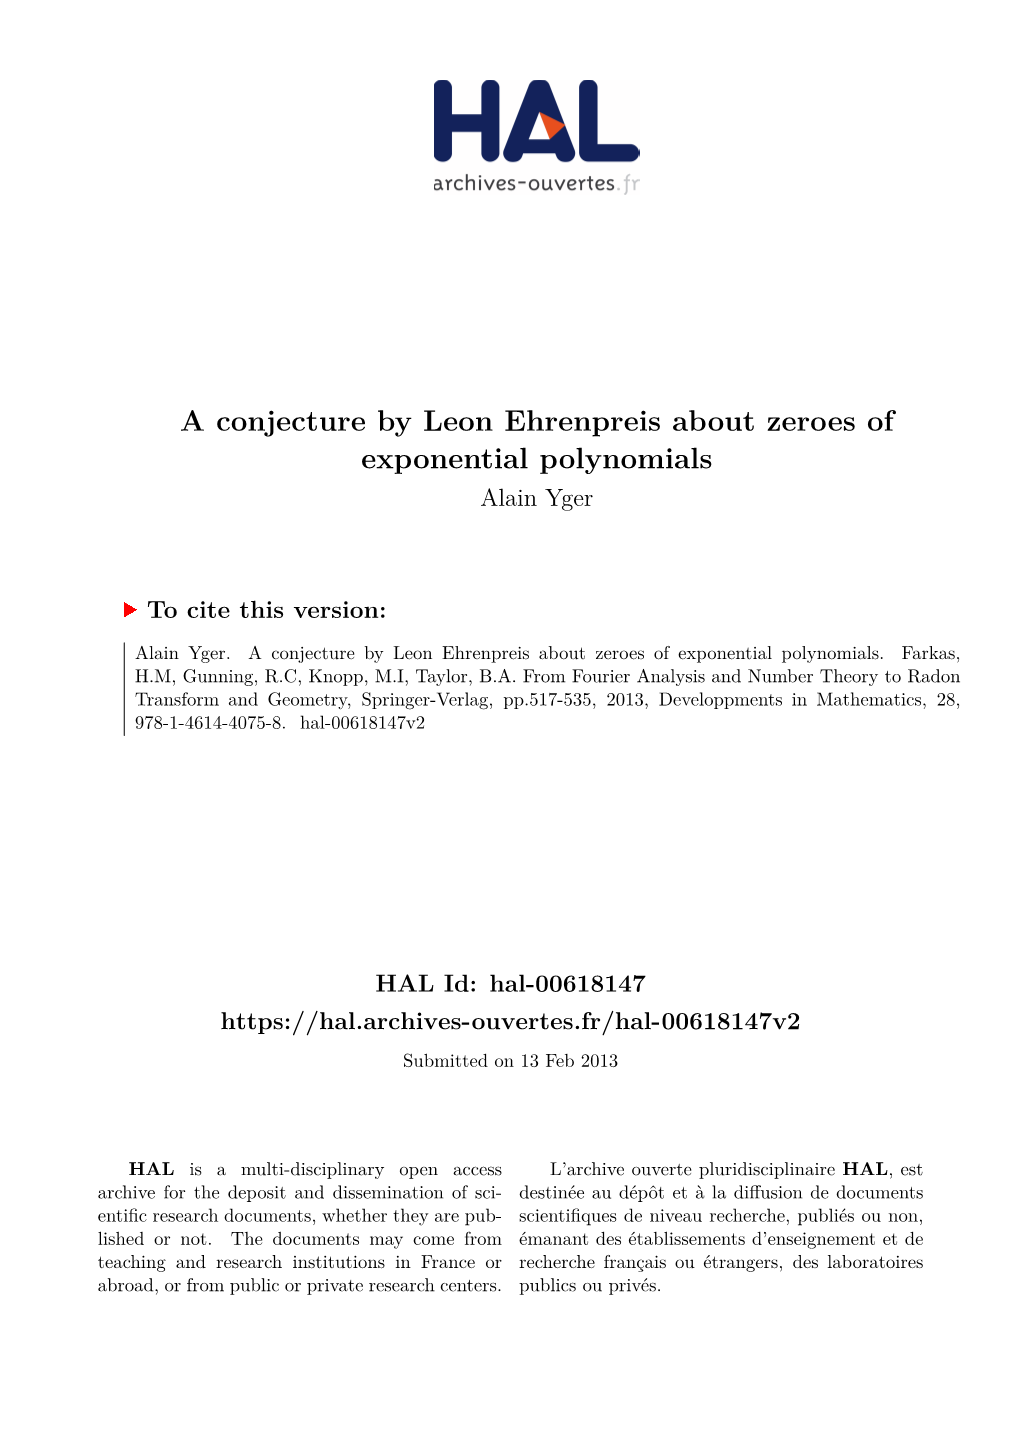 A Conjecture by Leon Ehrenpreis About Zeroes of Exponential Polynomials Alain Yger